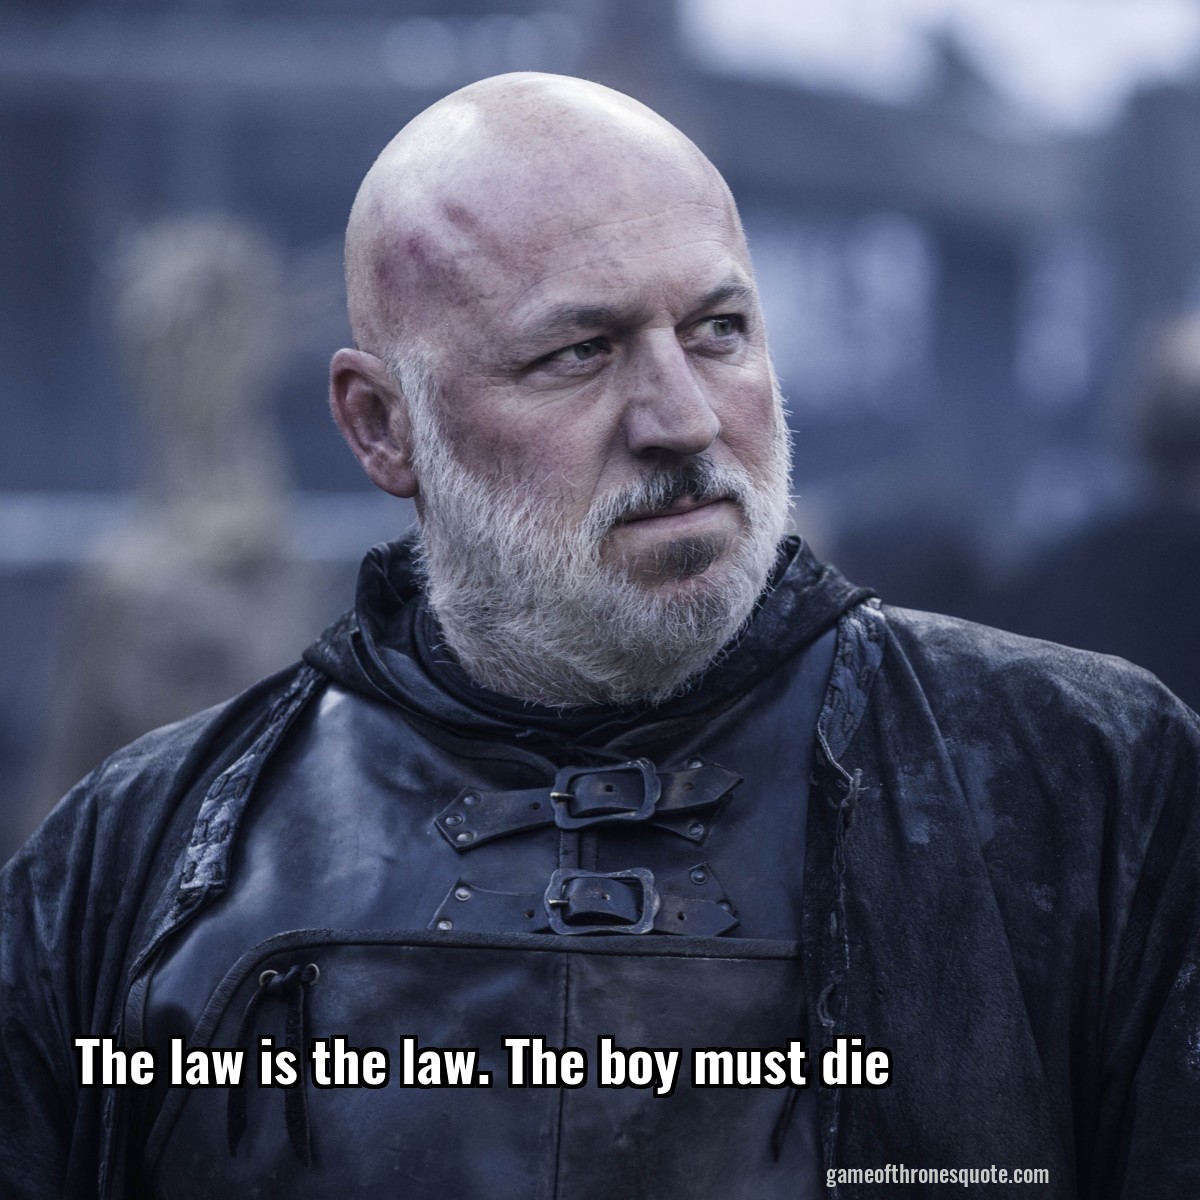 The law is the law. The boy must die